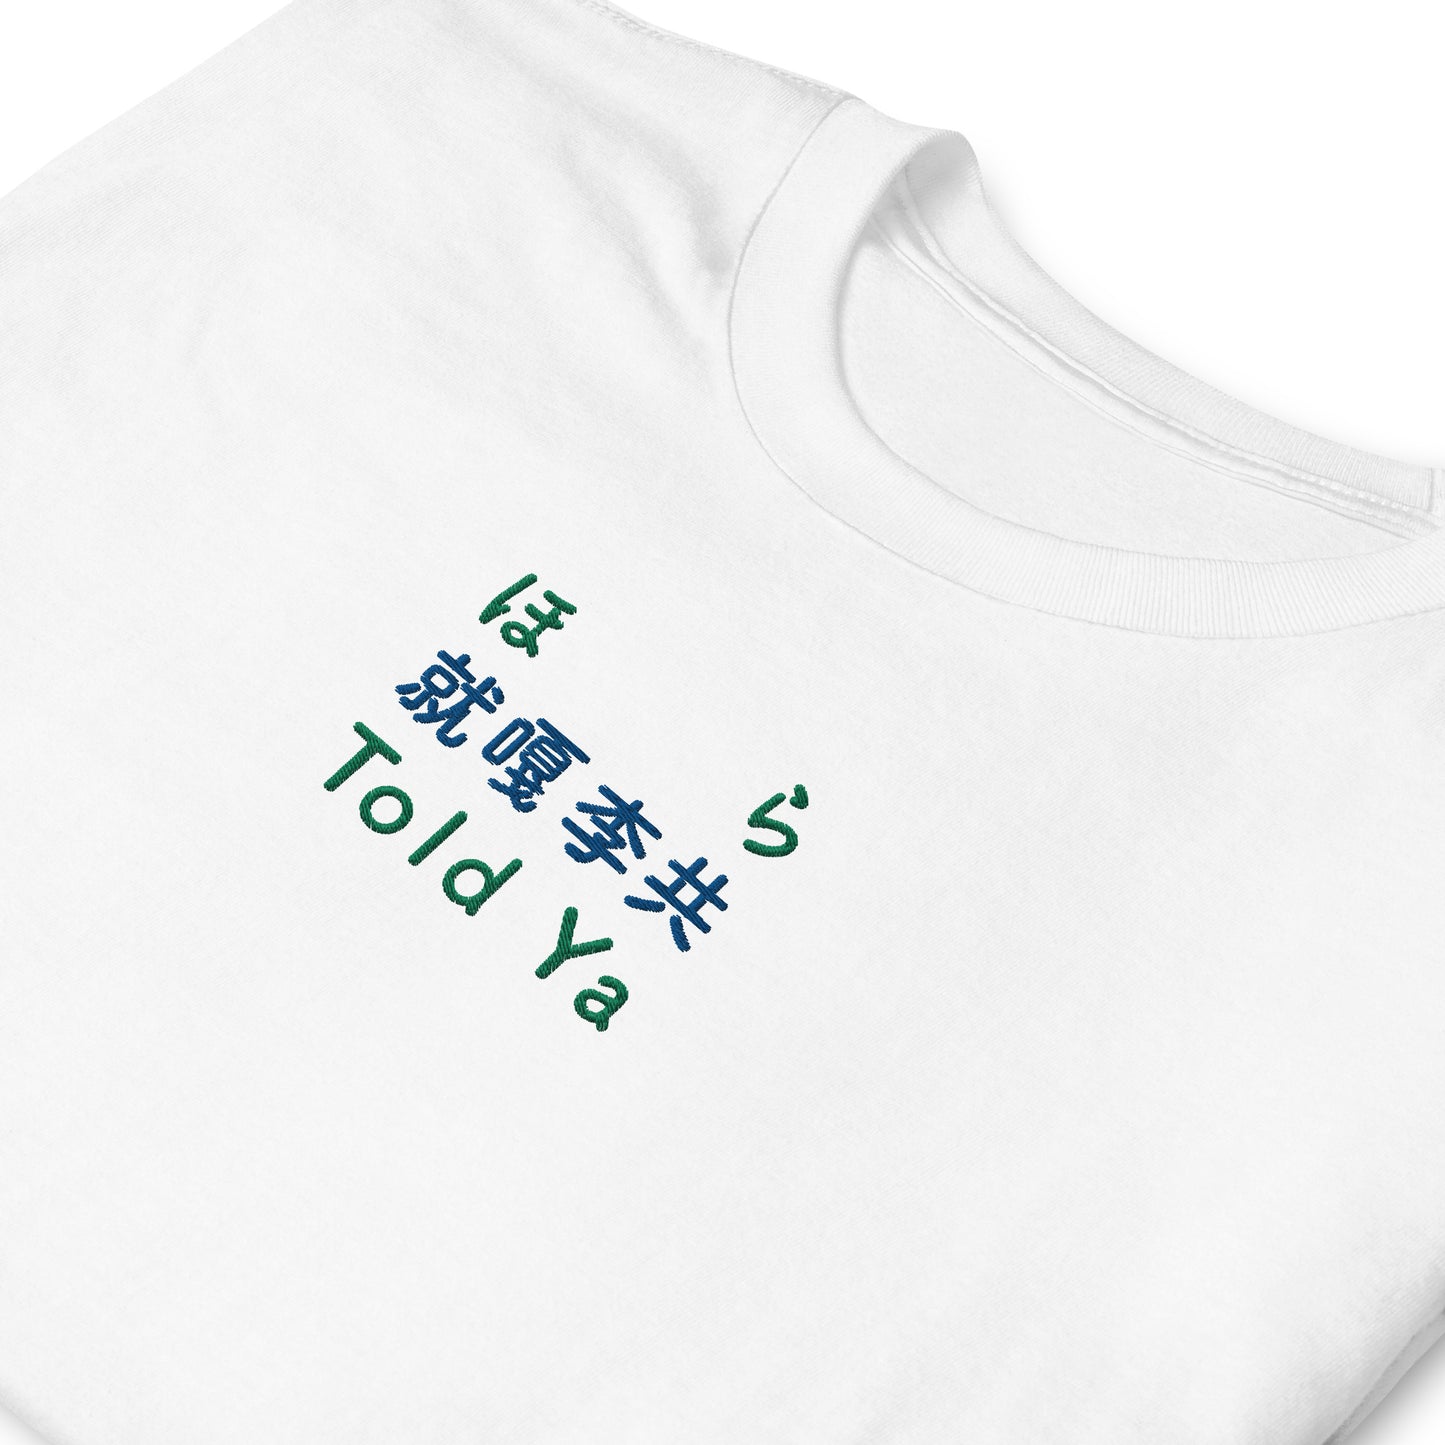 White High Quality Tee - Front Design with an Blue,Green Embroidery "Told Ya" in Japanese,Chinese and English